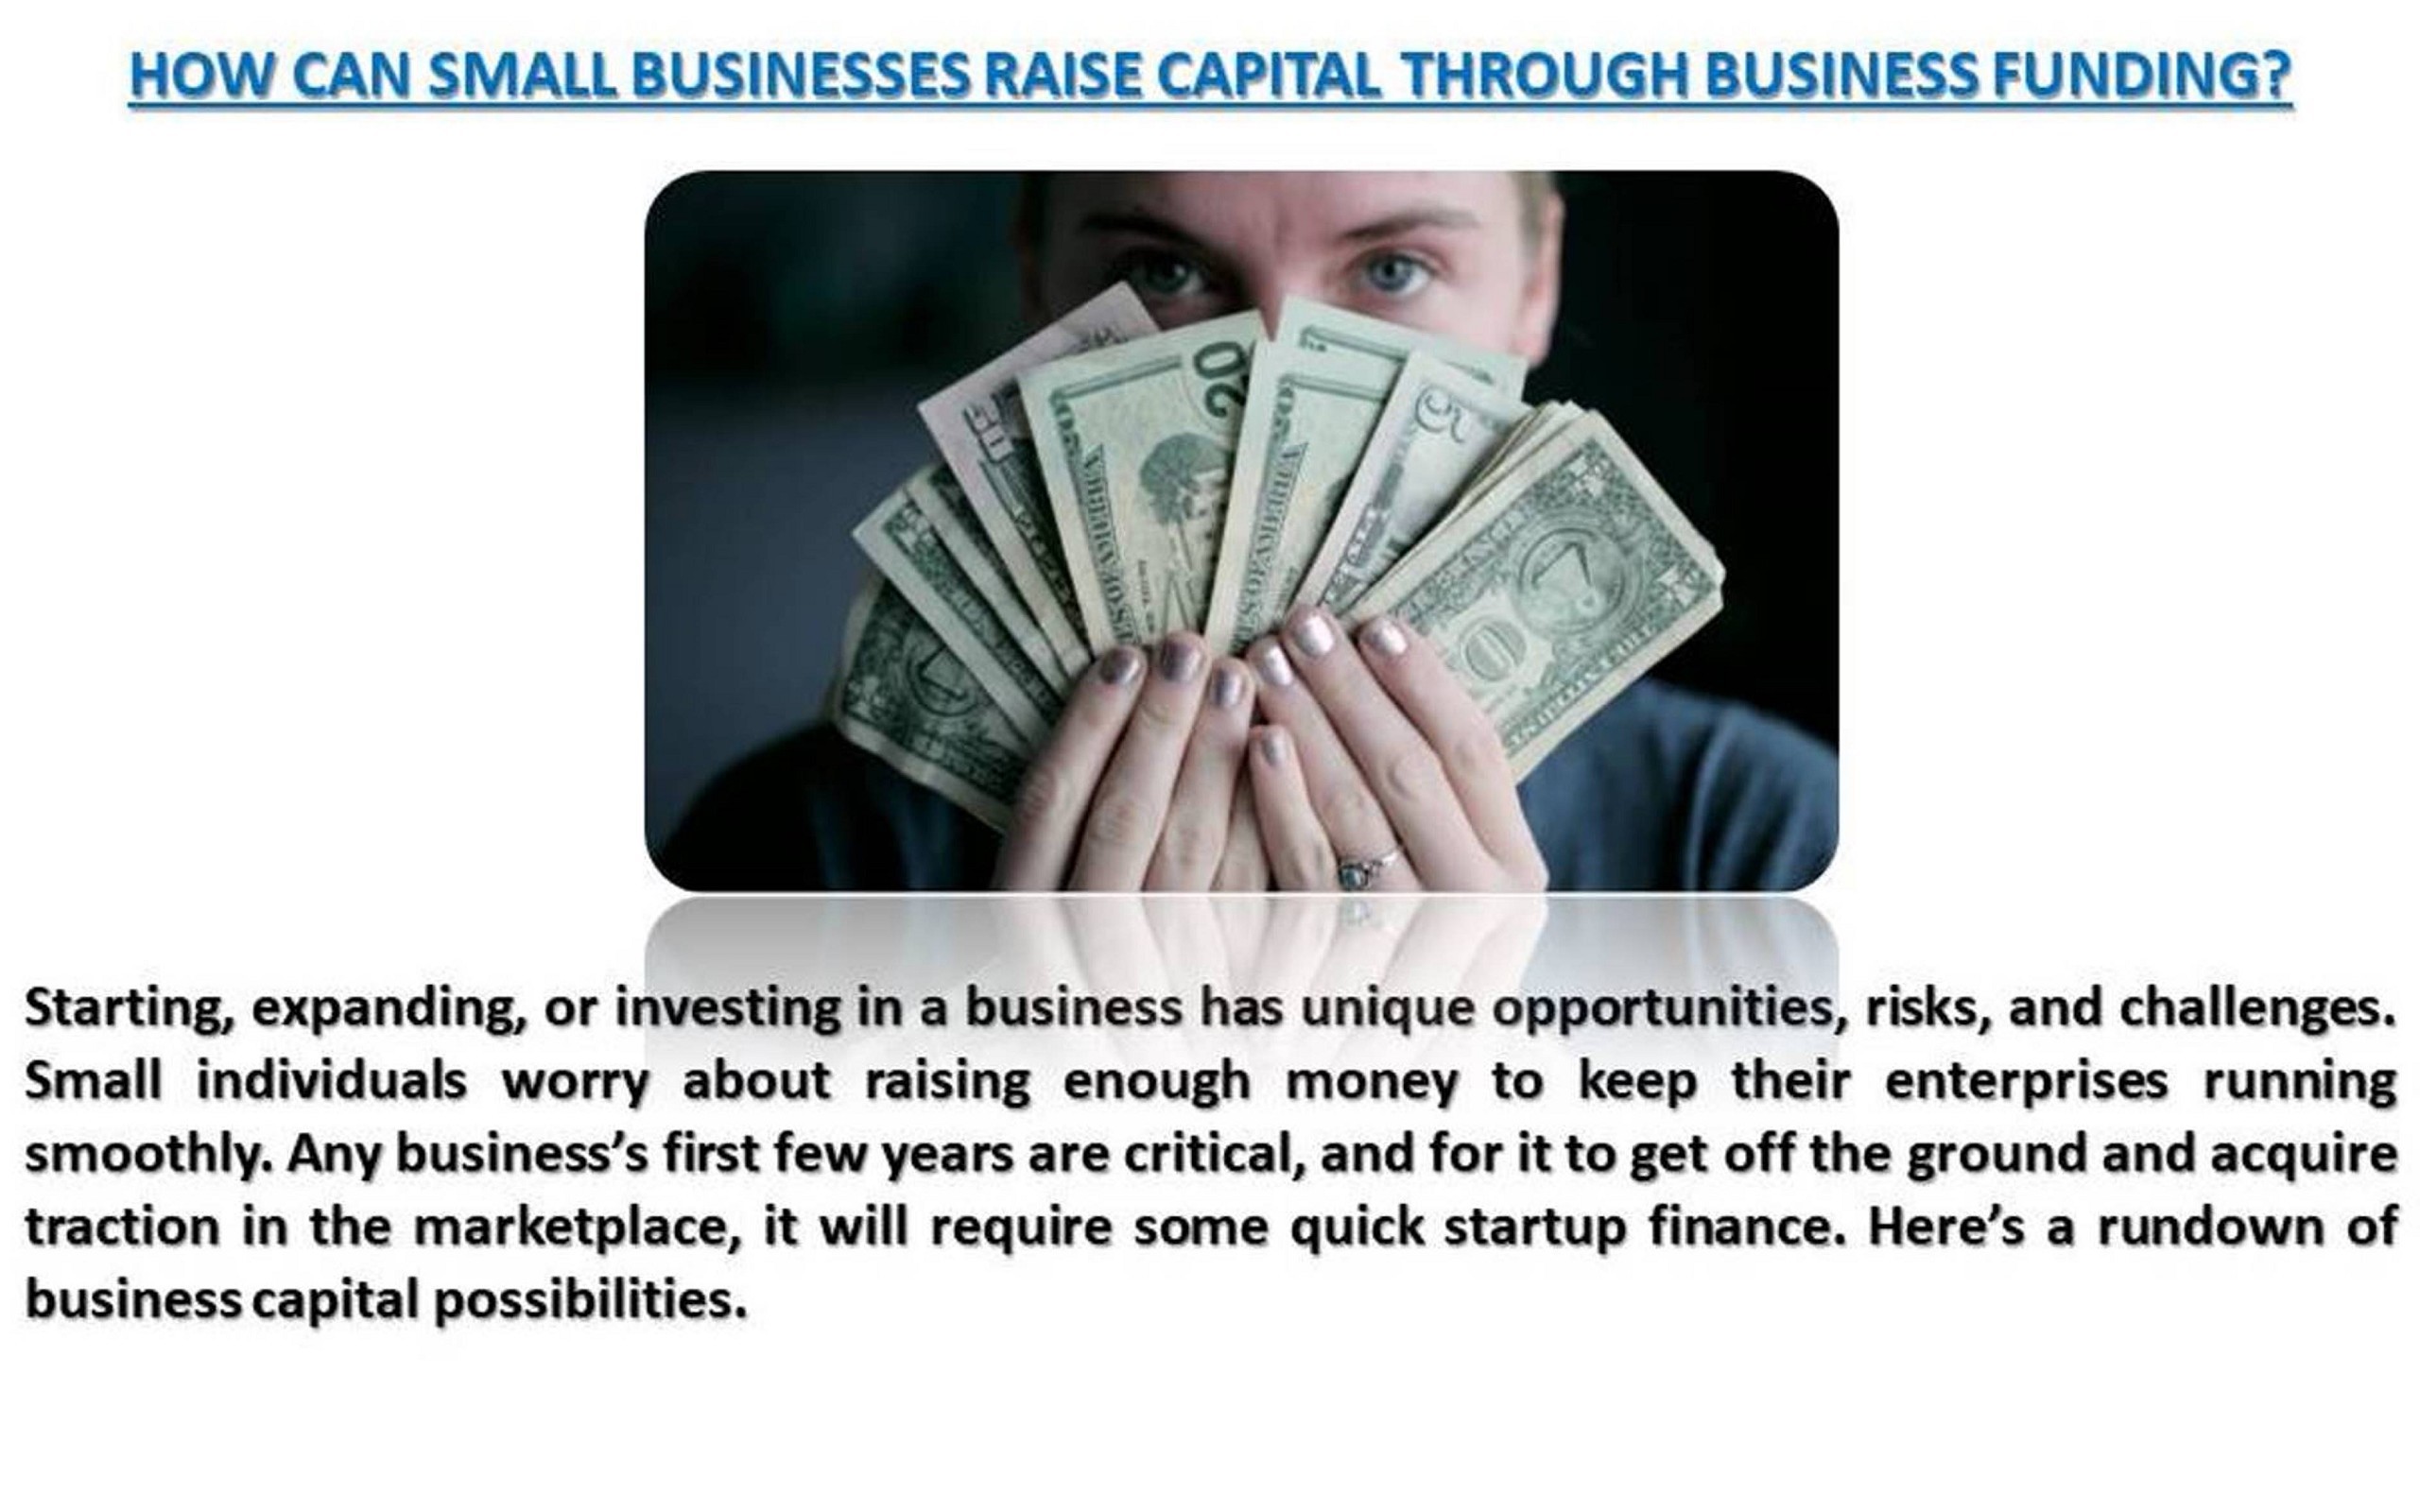 David Goodnight from Austin - How to Raise Capital from Small Business